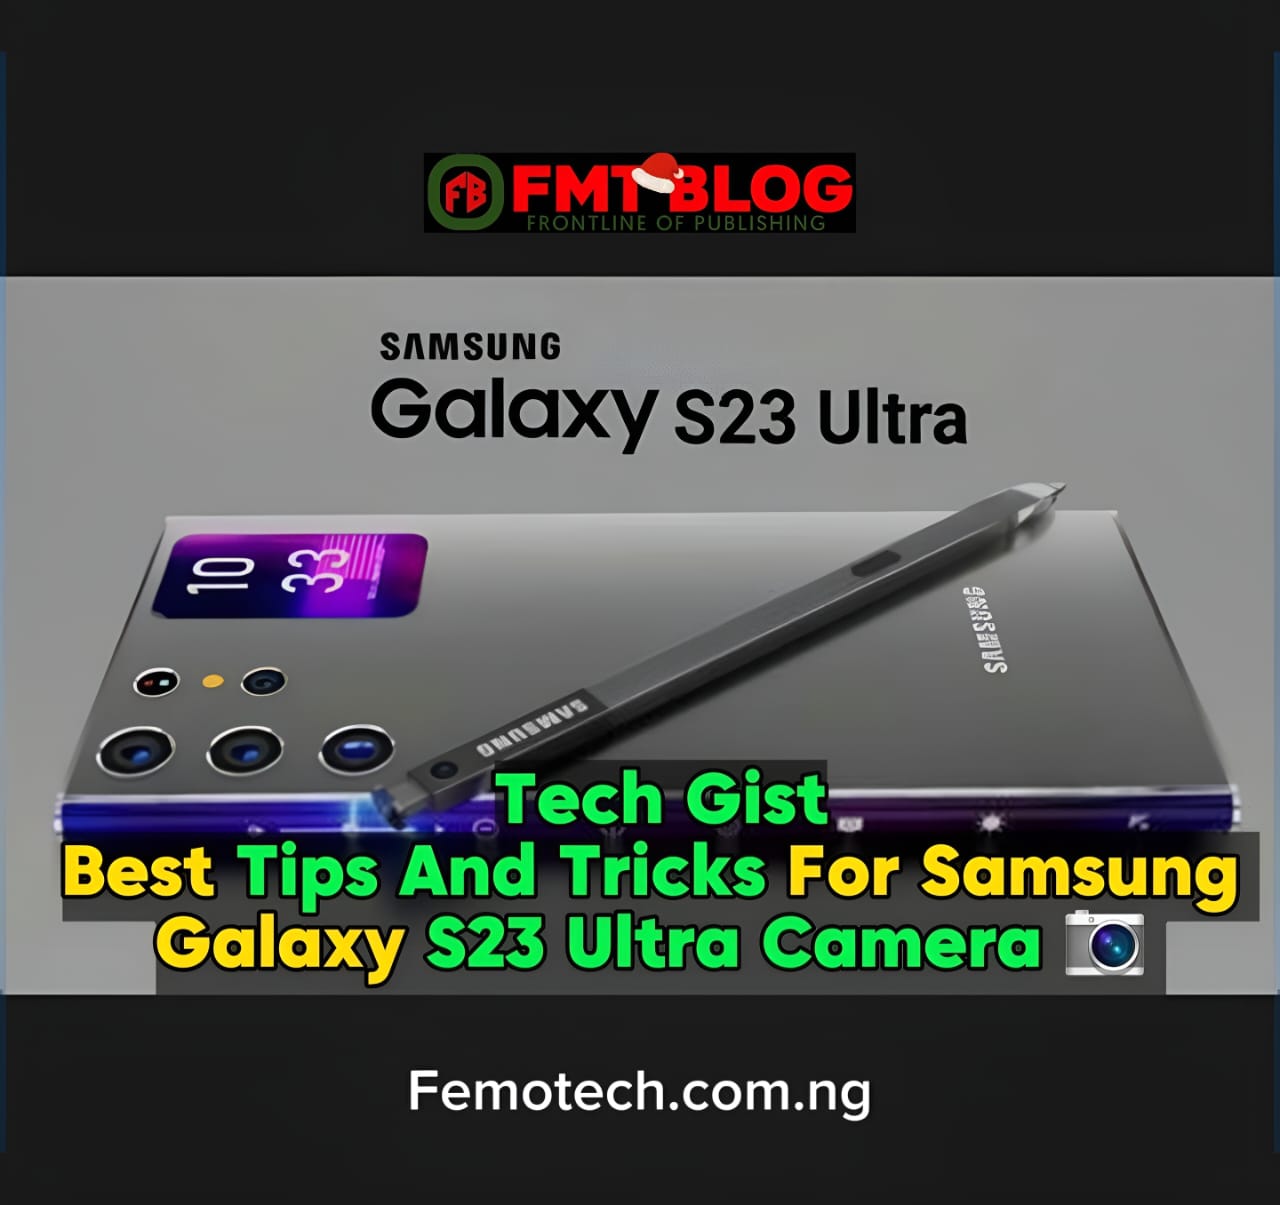 Best Tips And Tricks For Samsung Galaxy S23 Ultra Camera